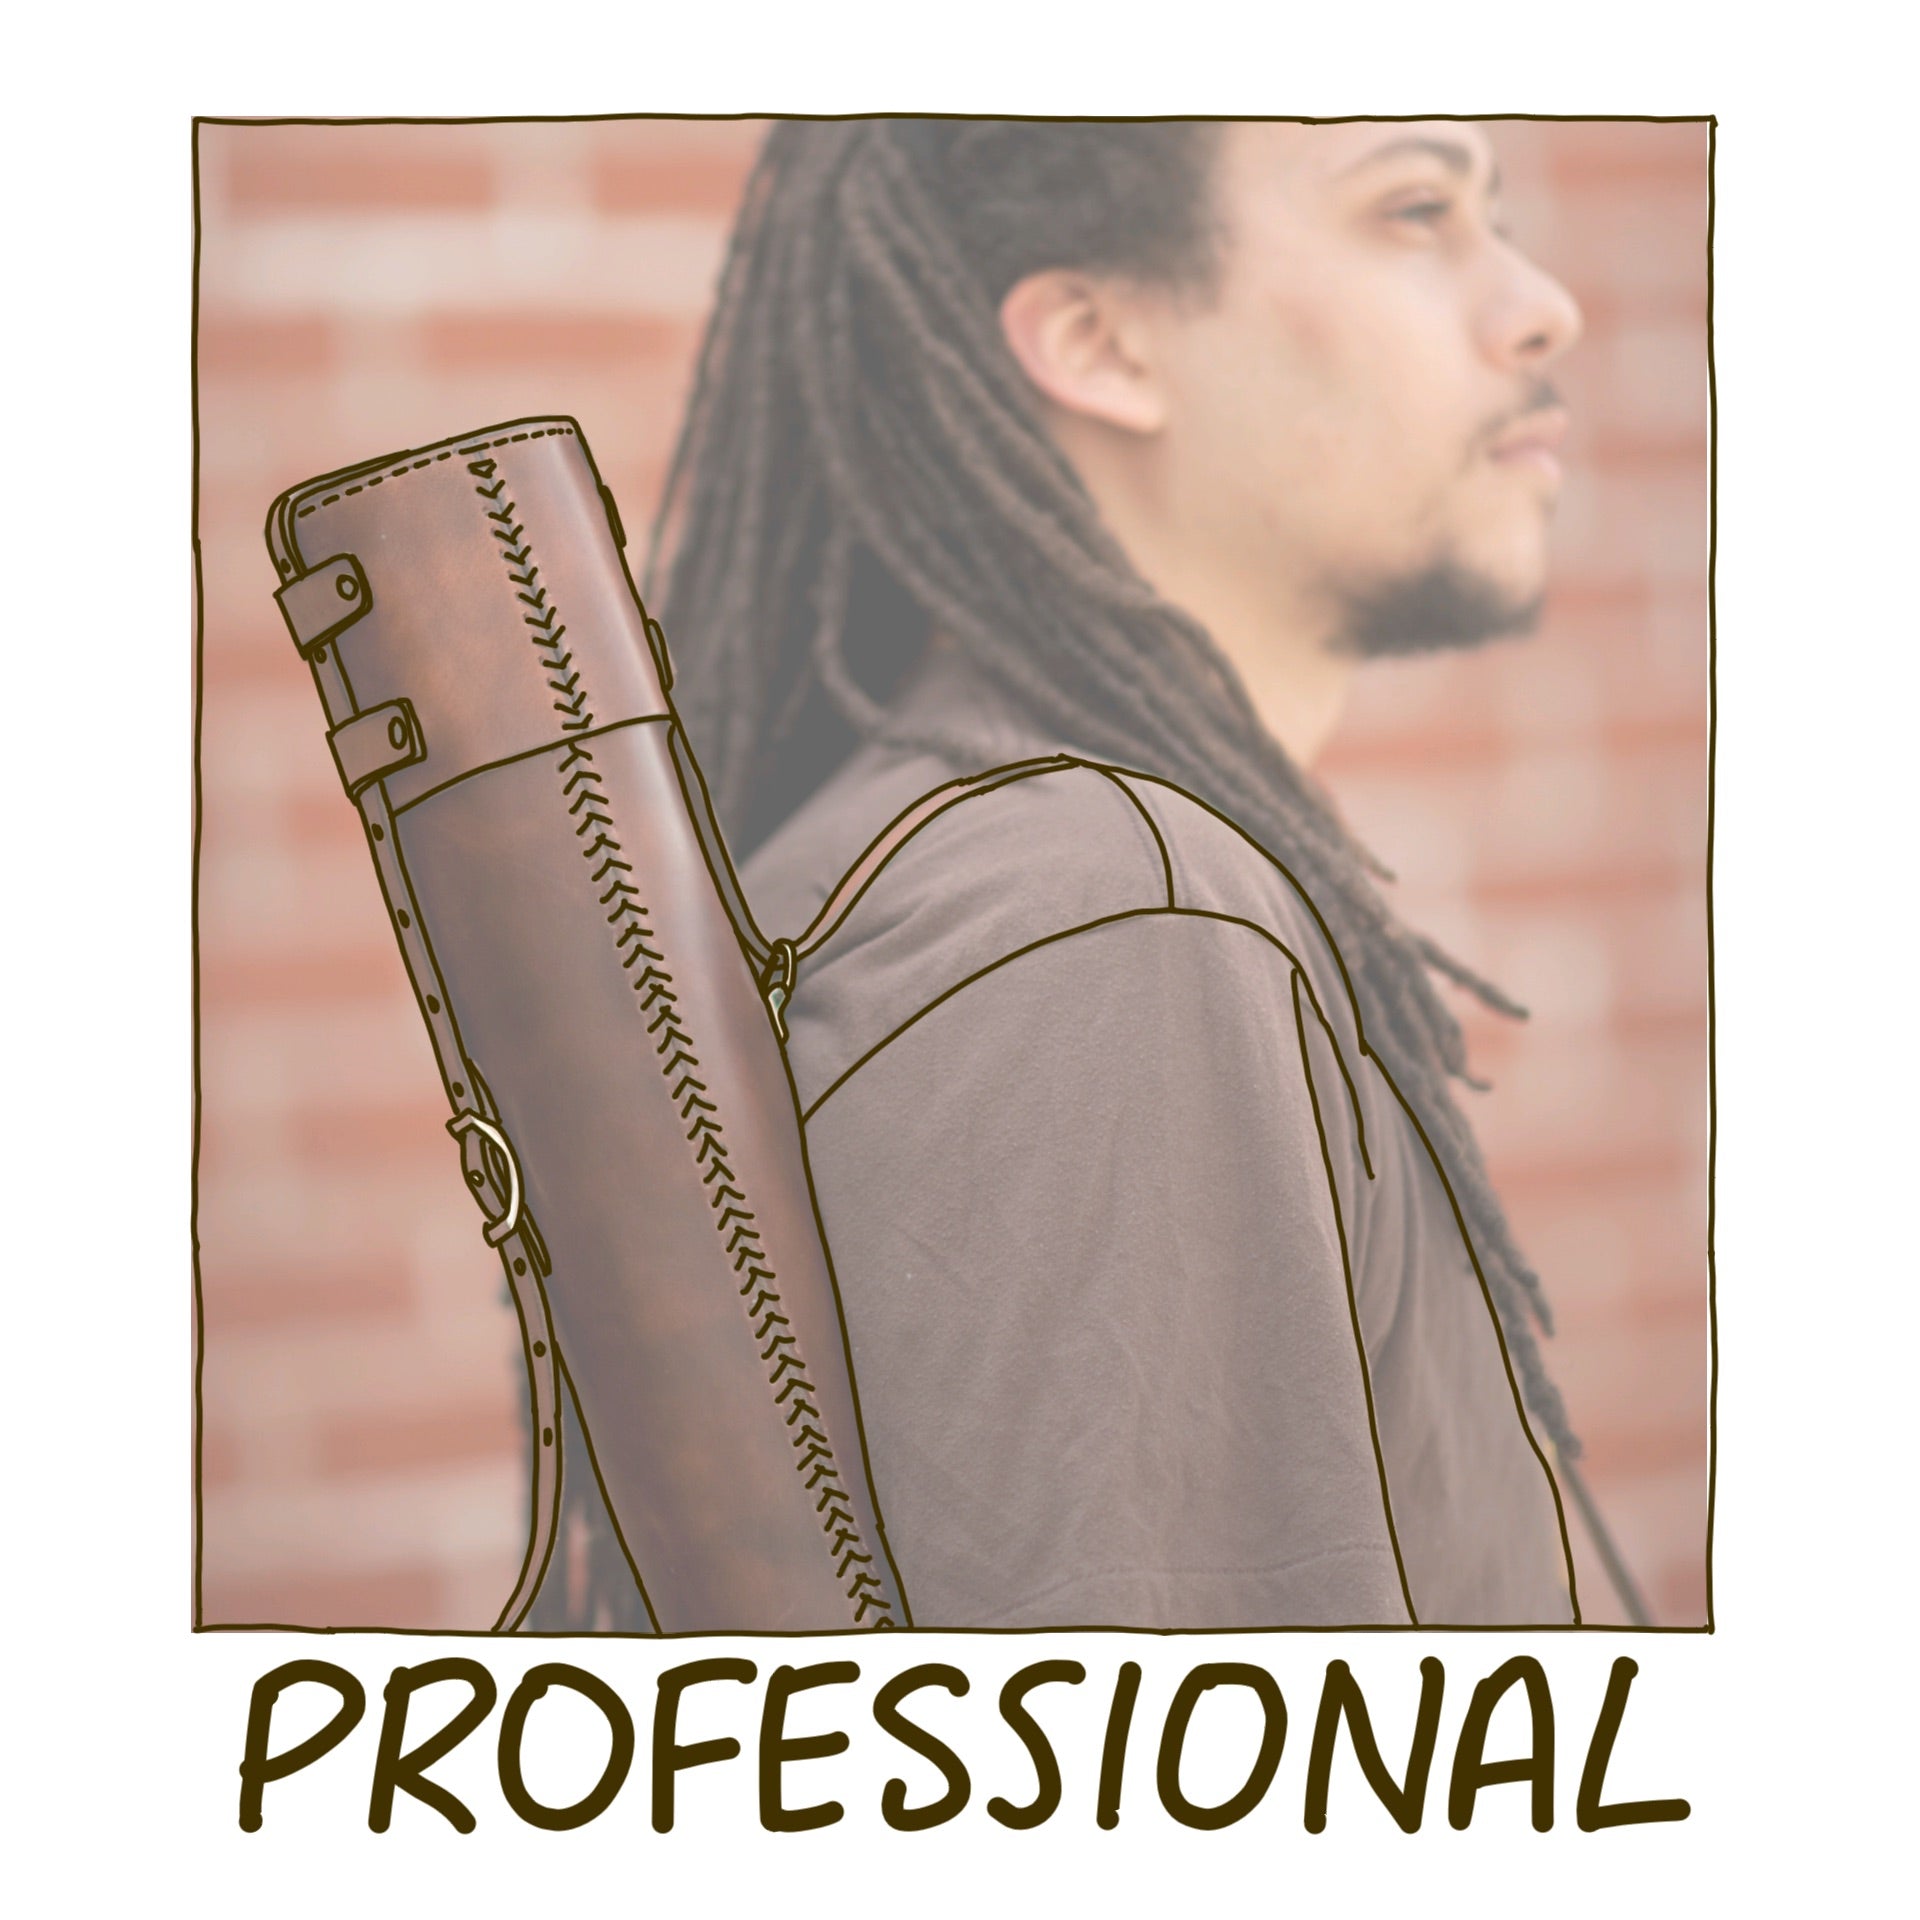 A man with beautiful long dreadlocks standing in front of a red brick wall wearing a brown t-shirt and holding a dark brown leather document tube over his shoulder for carrying large format prints and blueprints, with the word "Professional" underneath